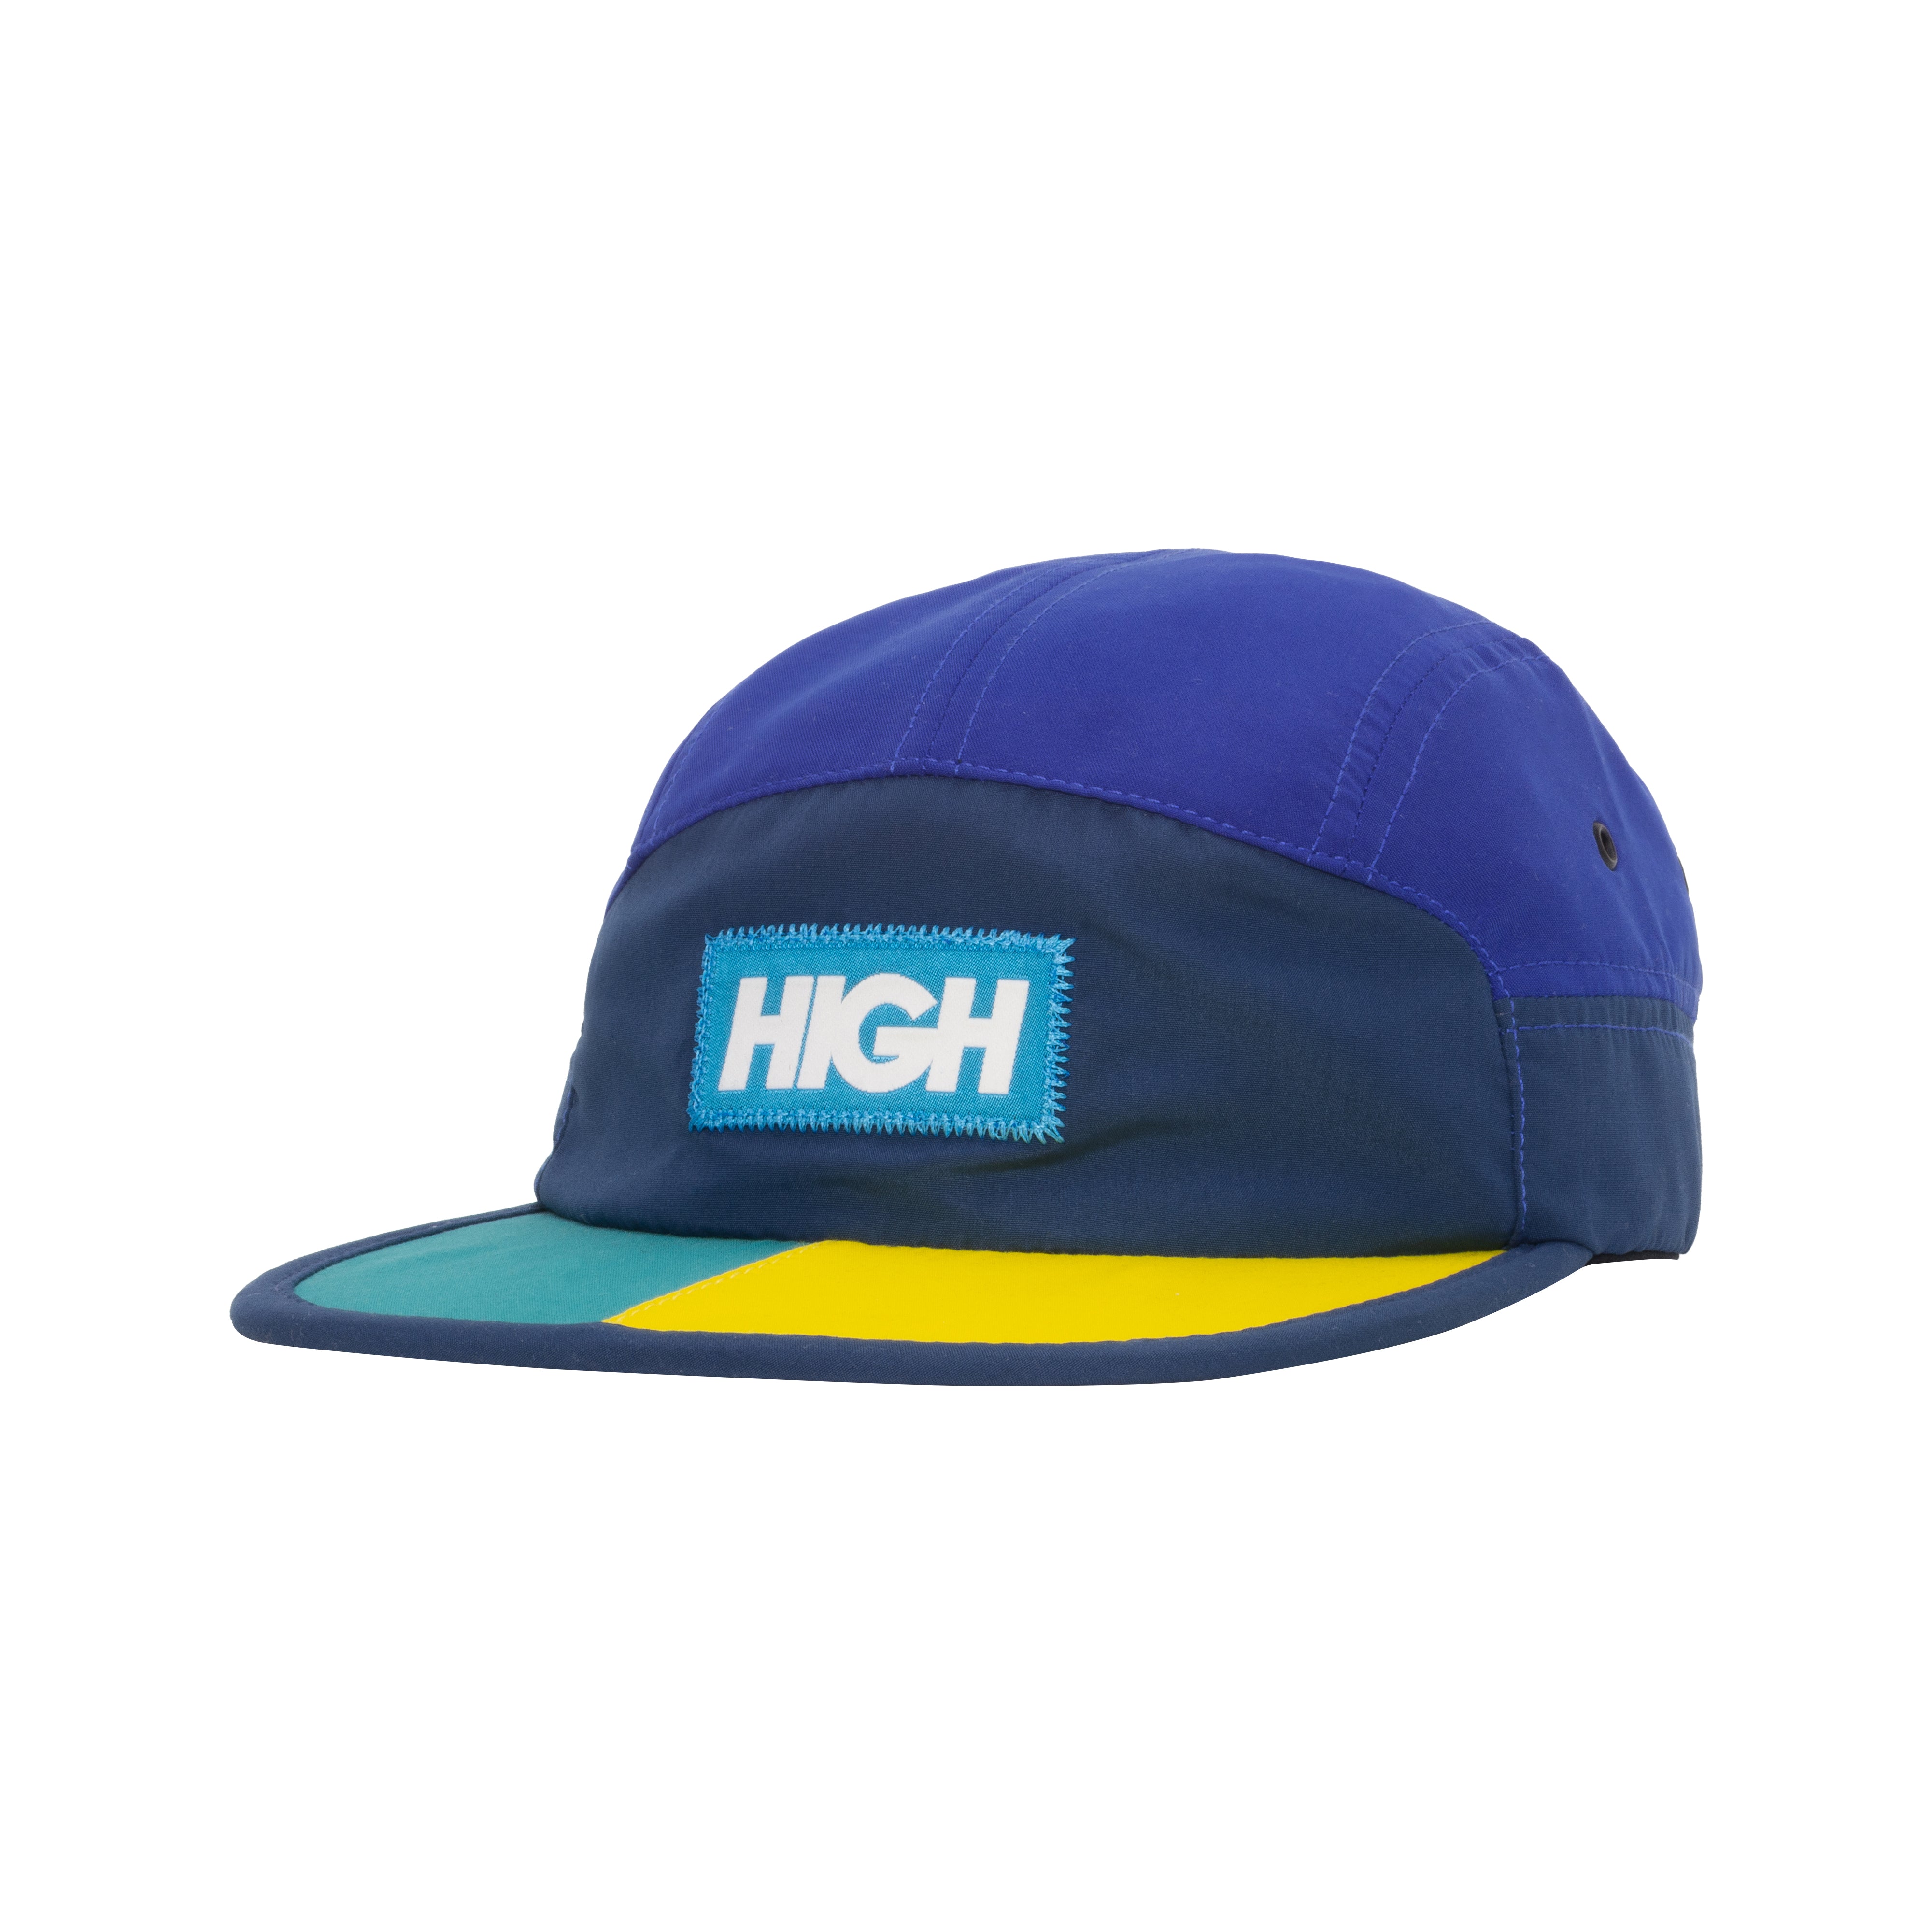 HIGH - 5 Panel Color Block Navy